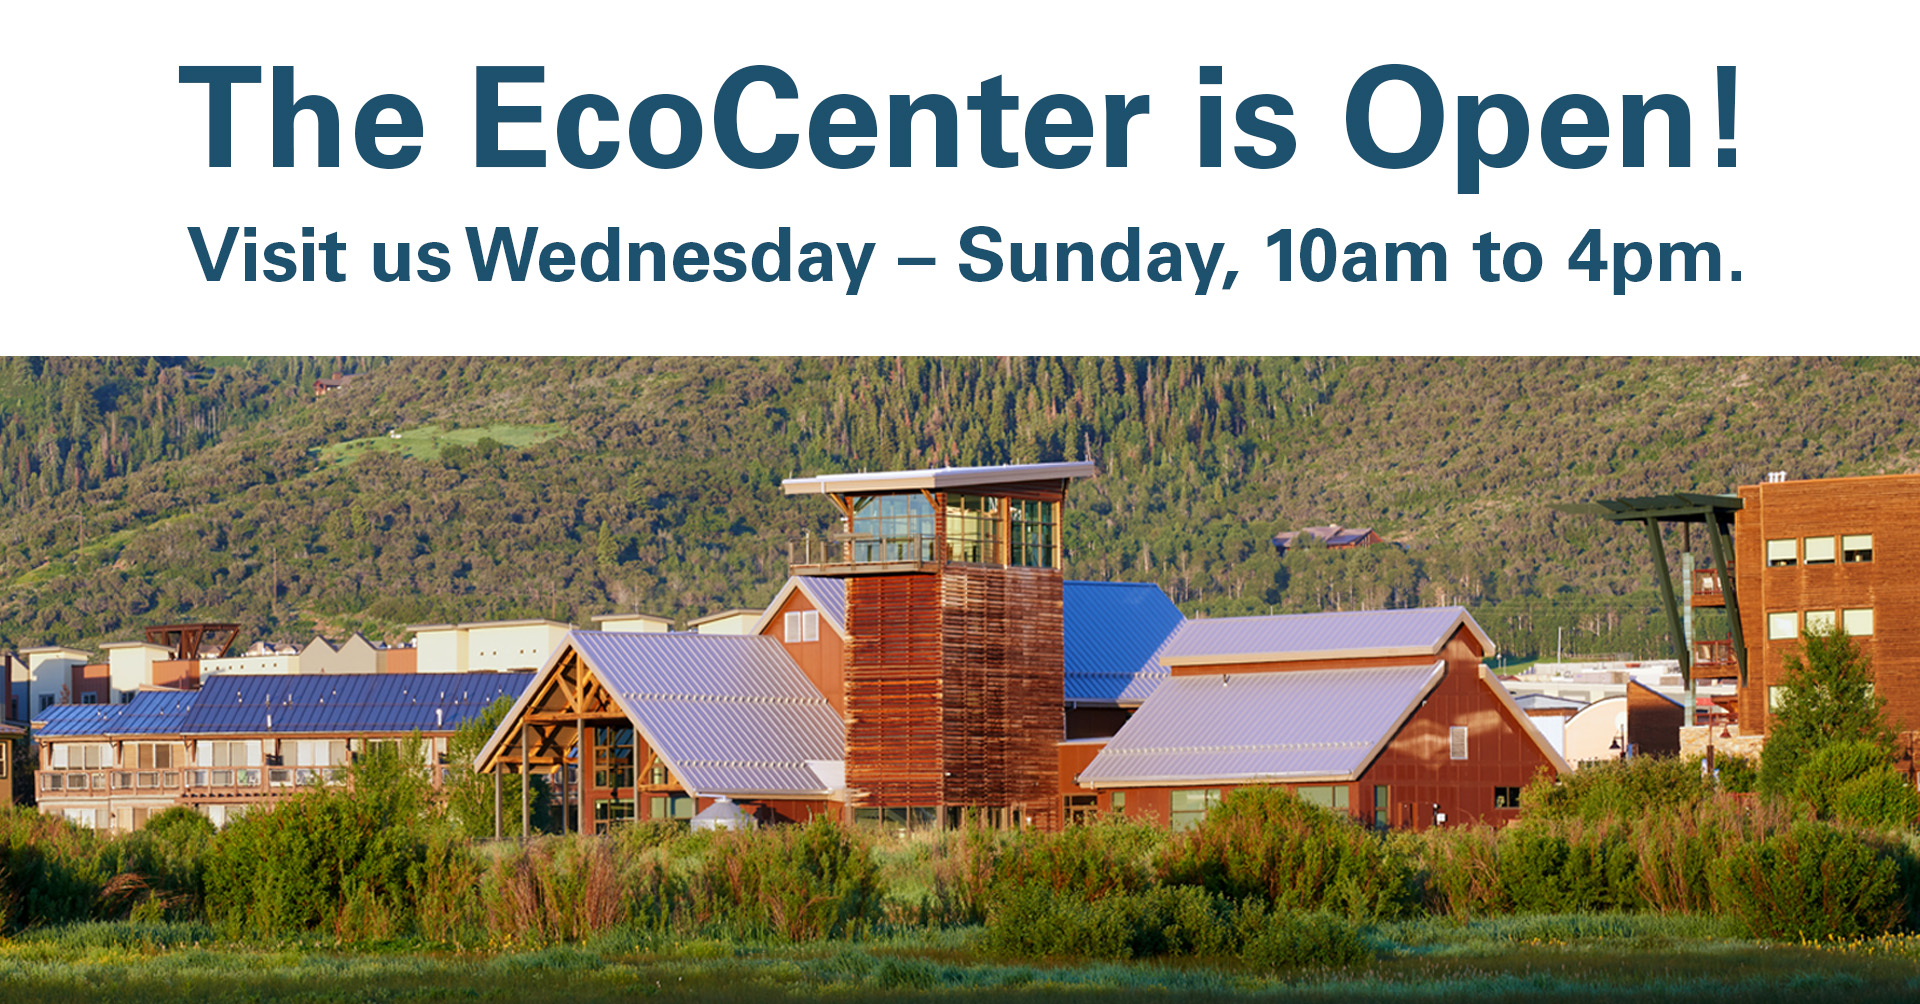 EcoCenter is open! Wednesday-Sunday, 10am-4pm